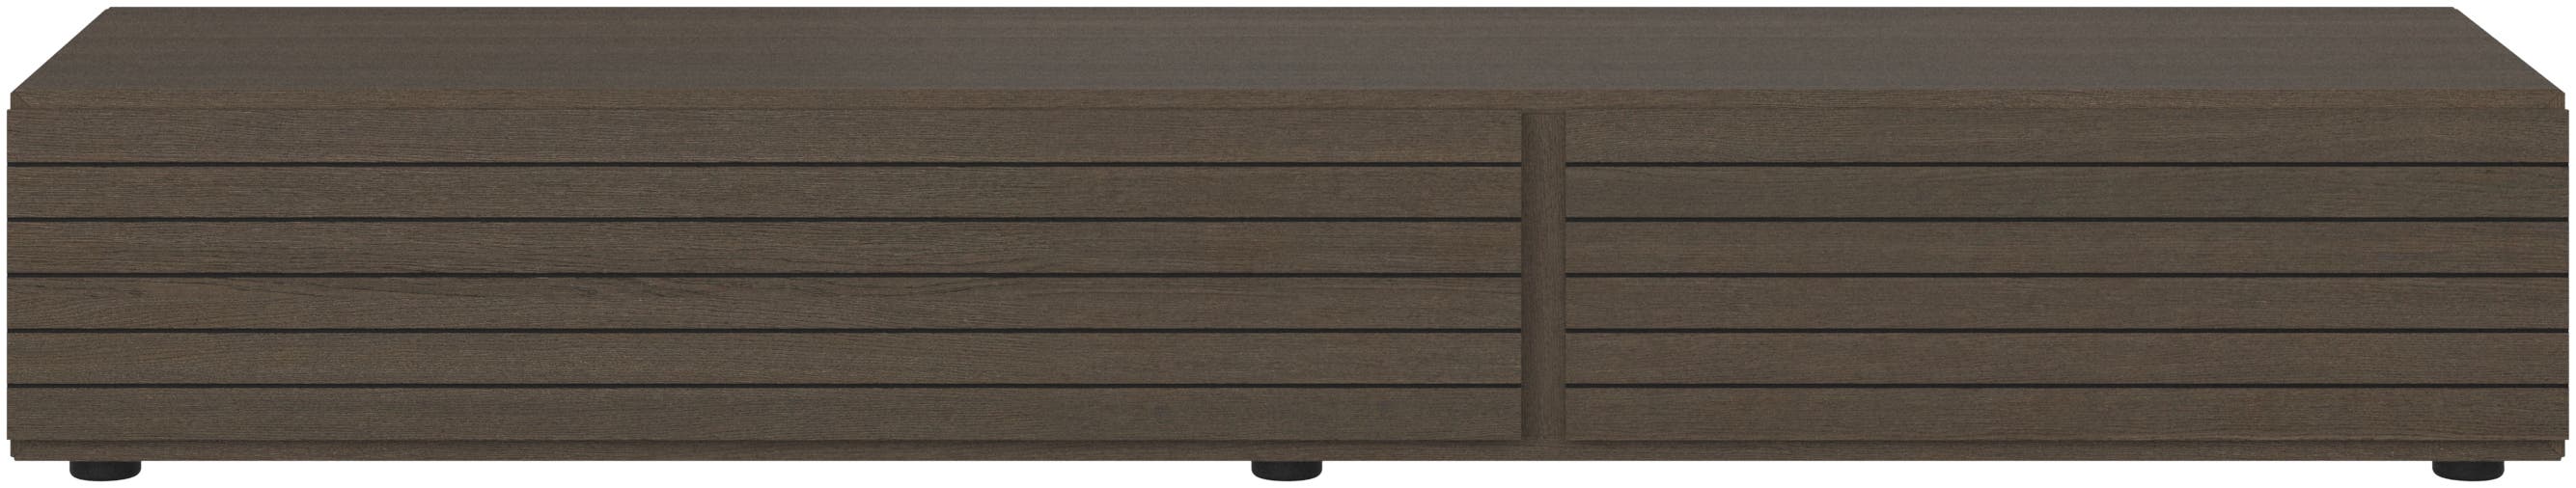 Lugano base cabinet with drop down doors